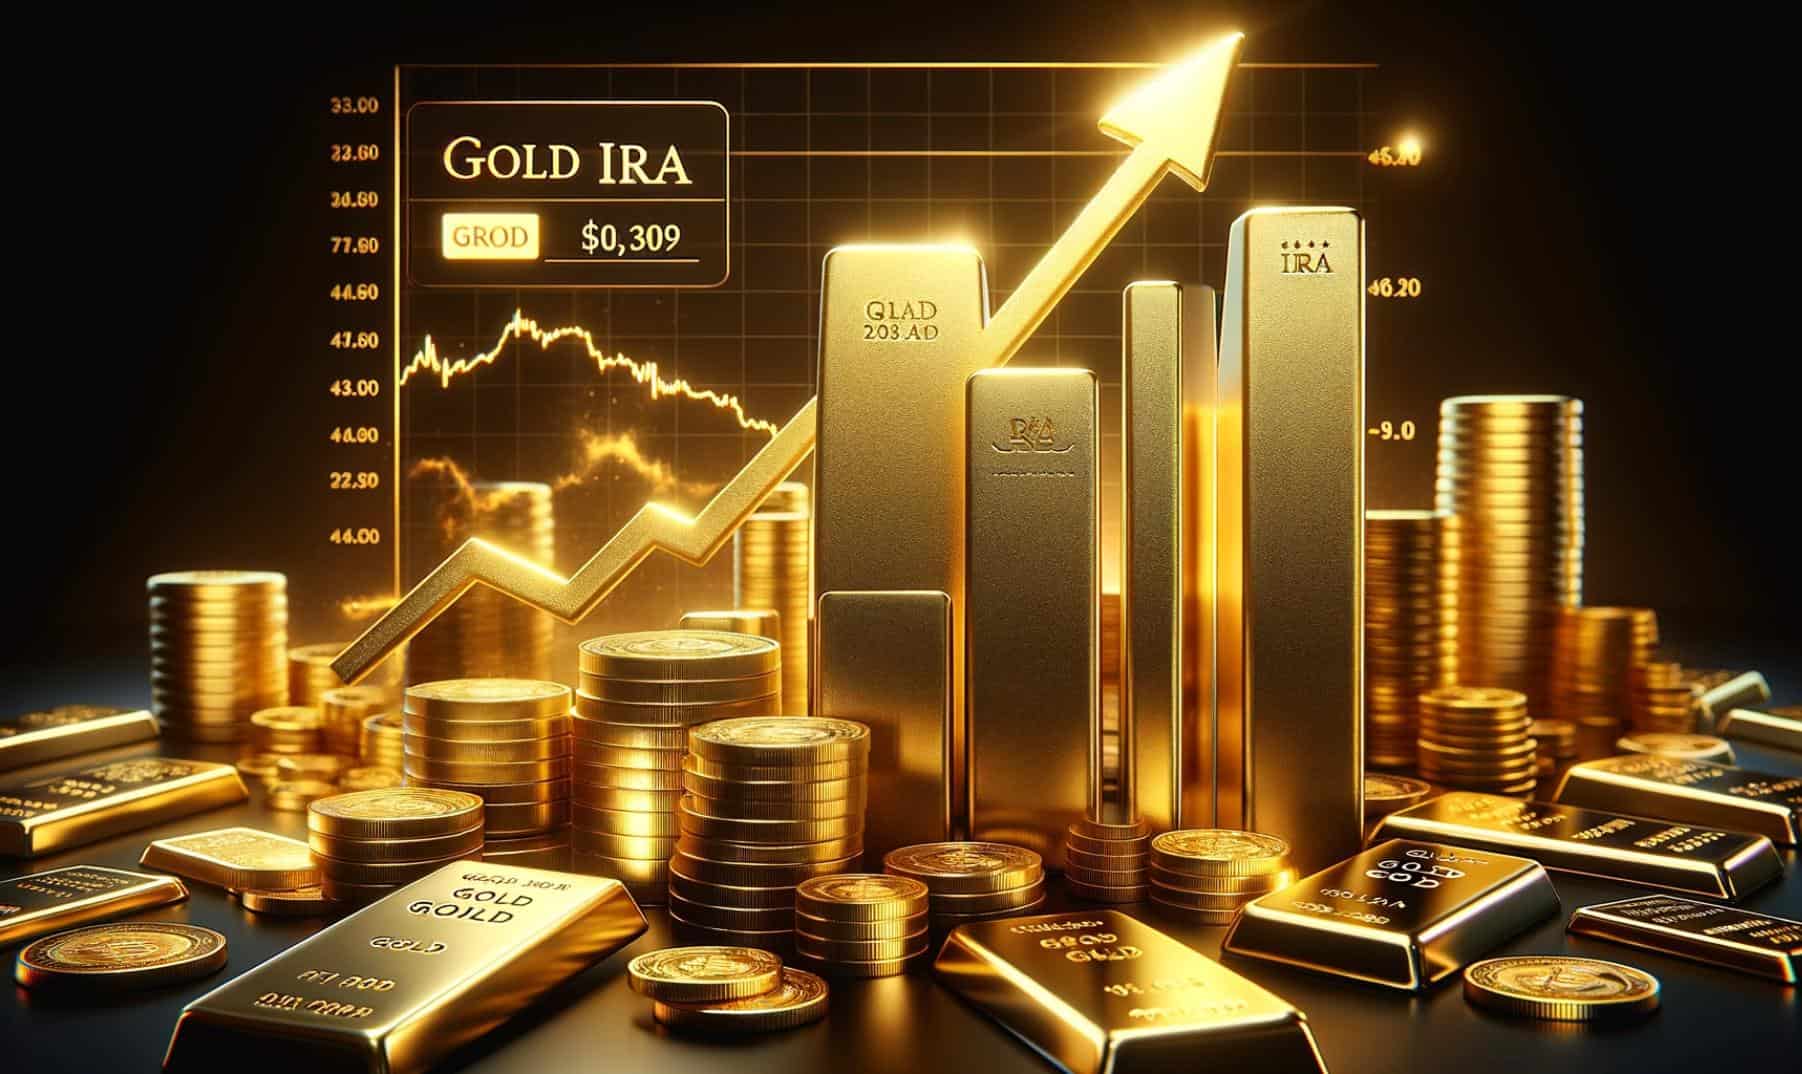 A rectangular image of a gold IRA investing chart showing the price of gold rocketing to all-time highs, surrounded by gold bars. This visual representation captures the essence of a prosperous gold investment scenario.